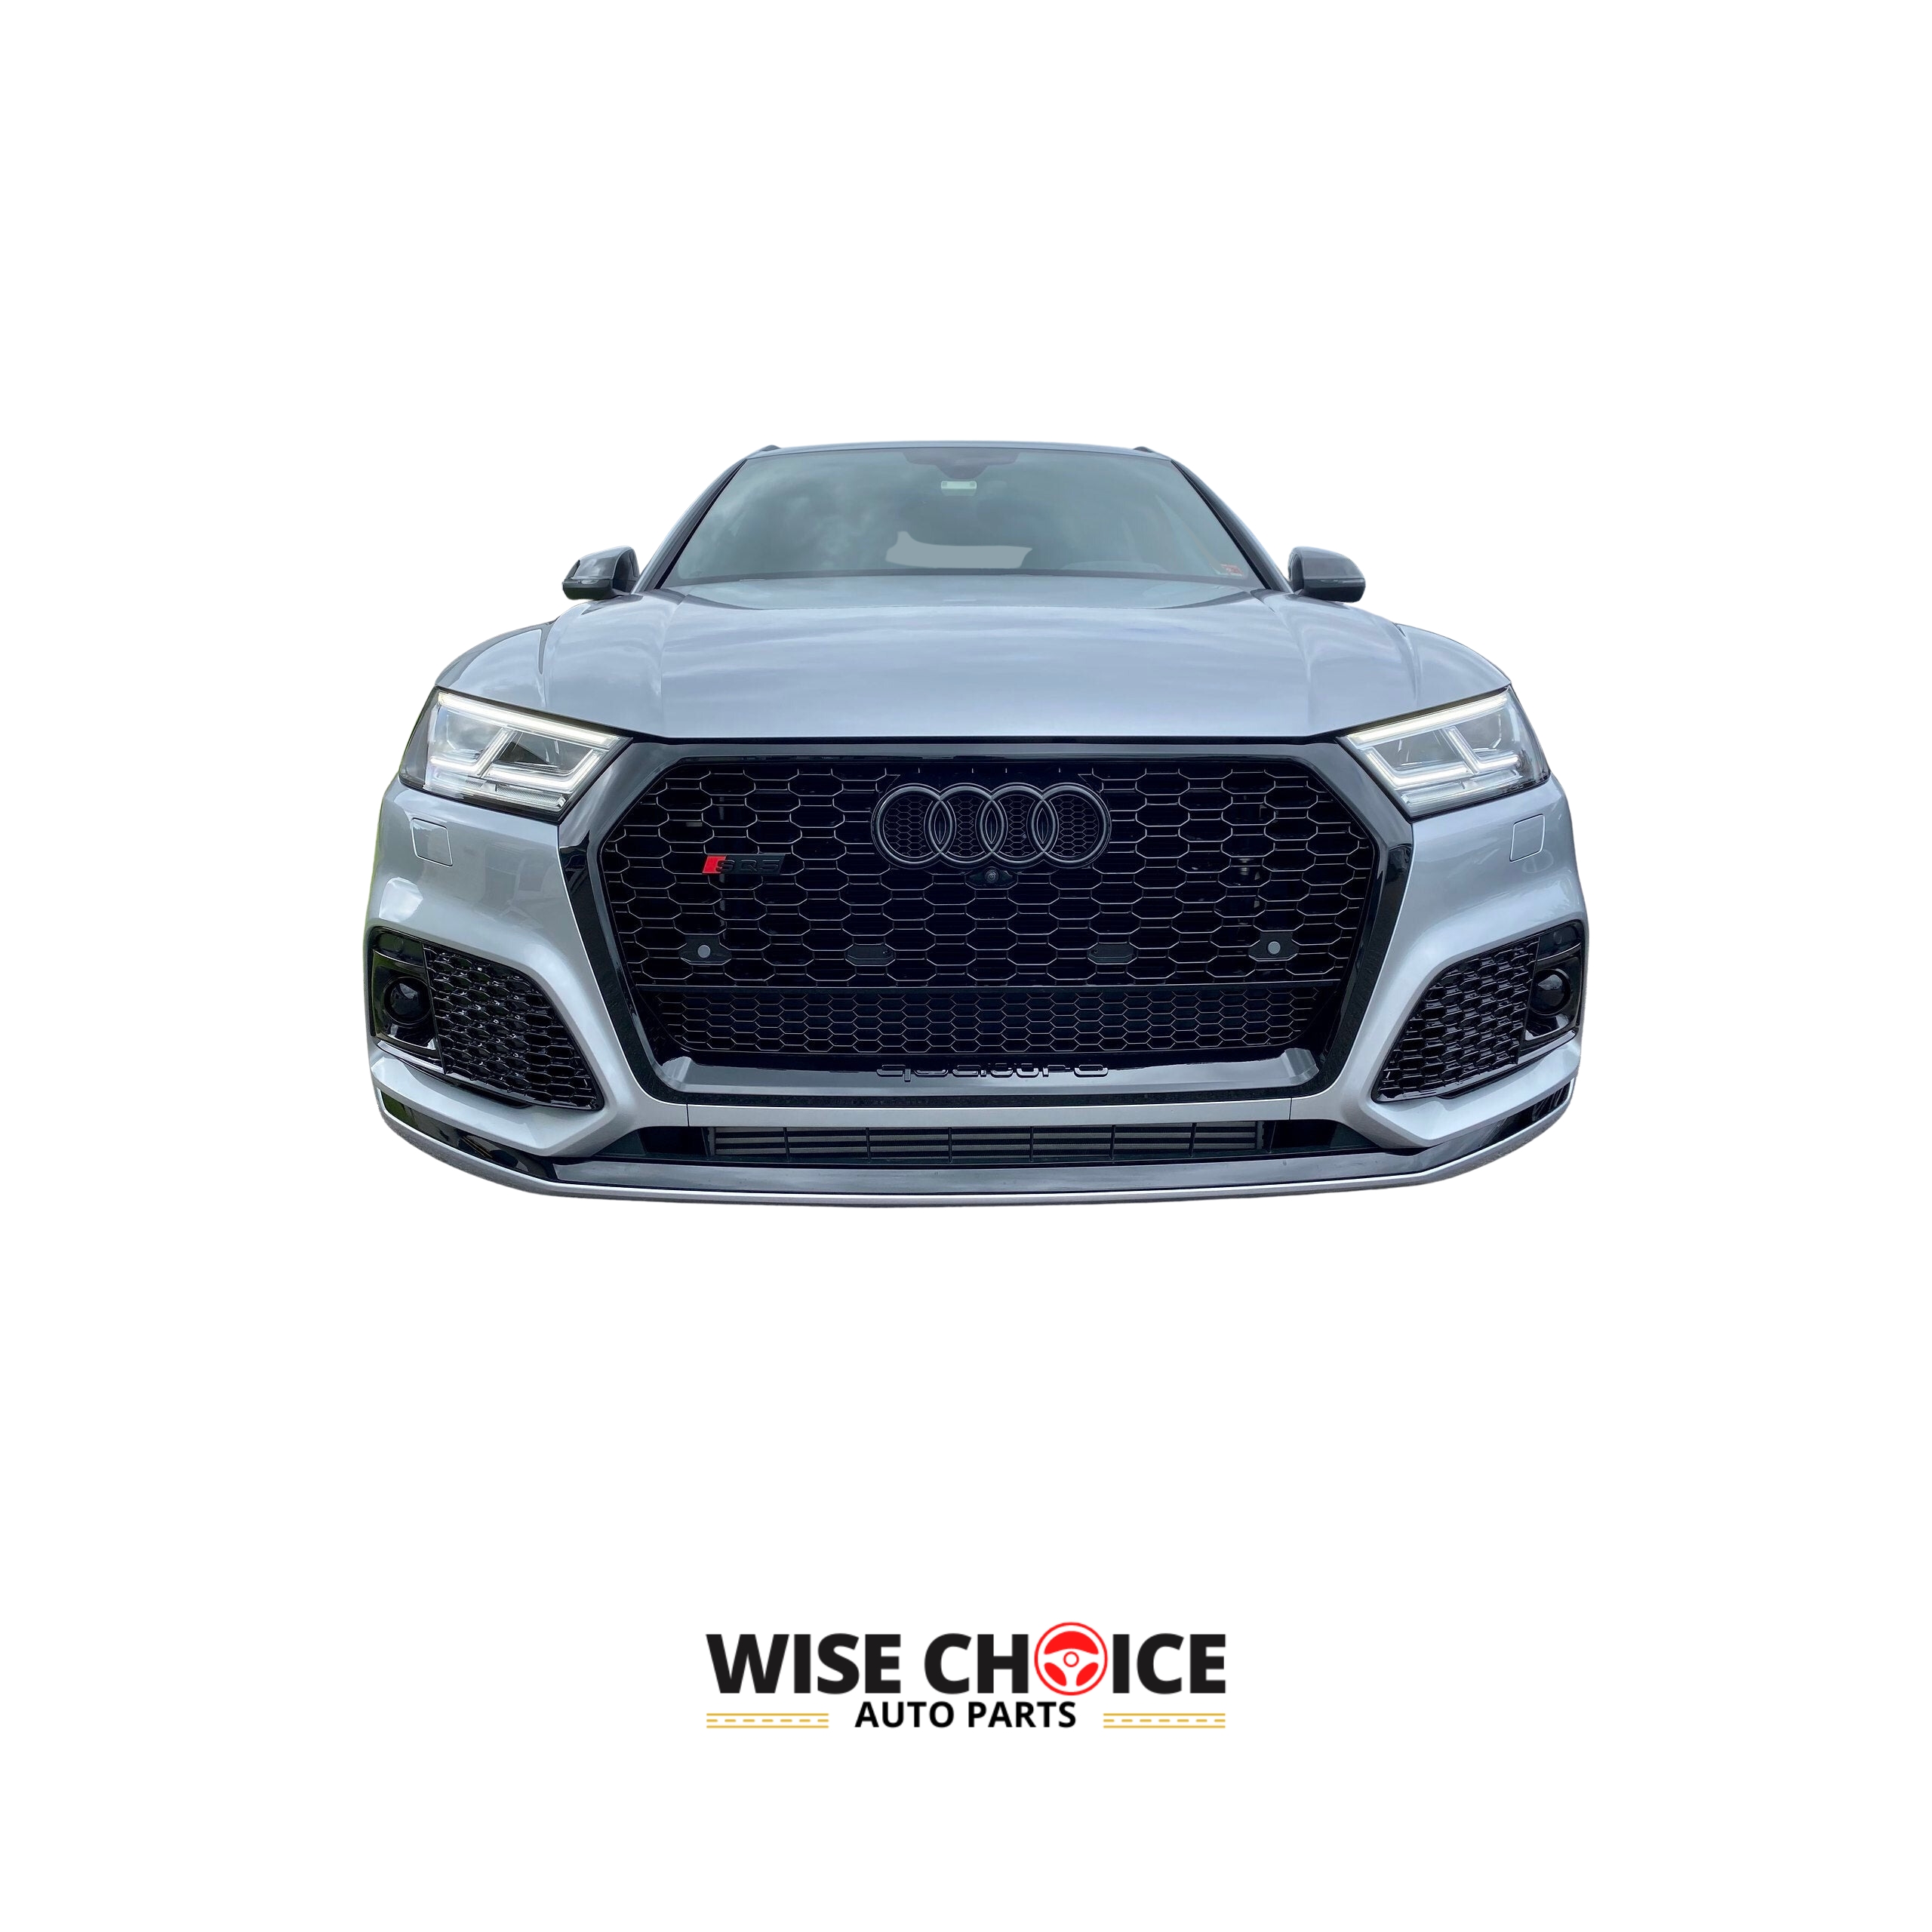 Audi RSQ5 Honeycomb Grille for 2018-2021 FY Q5/SQ5